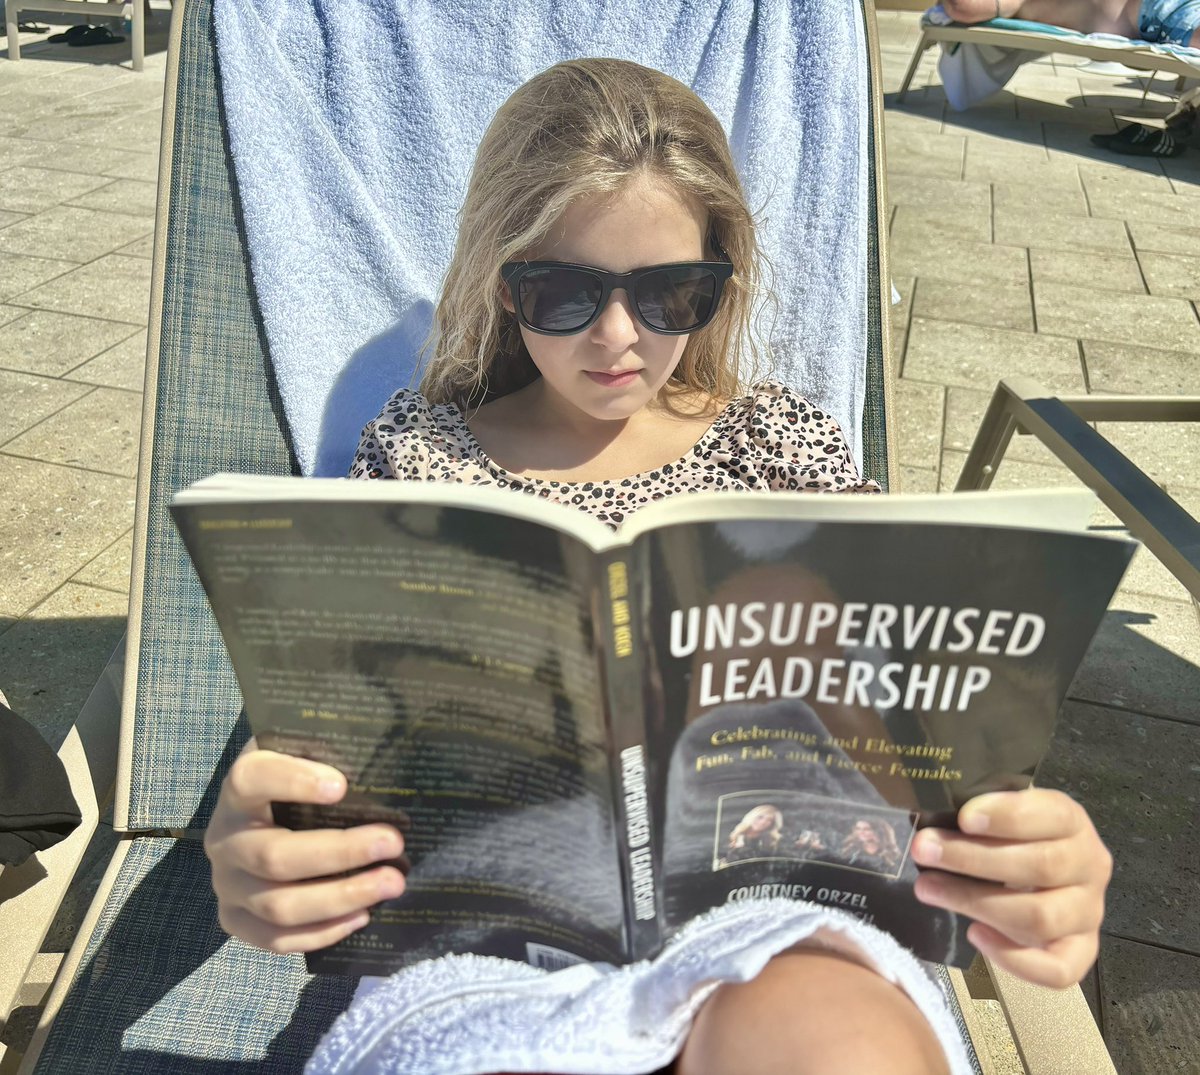 Looking for a great read on spring break? We are back in stock! #F4Leaders Order your copy of Unsupervised Leadership today: amazon.com/Unsupervised-L…